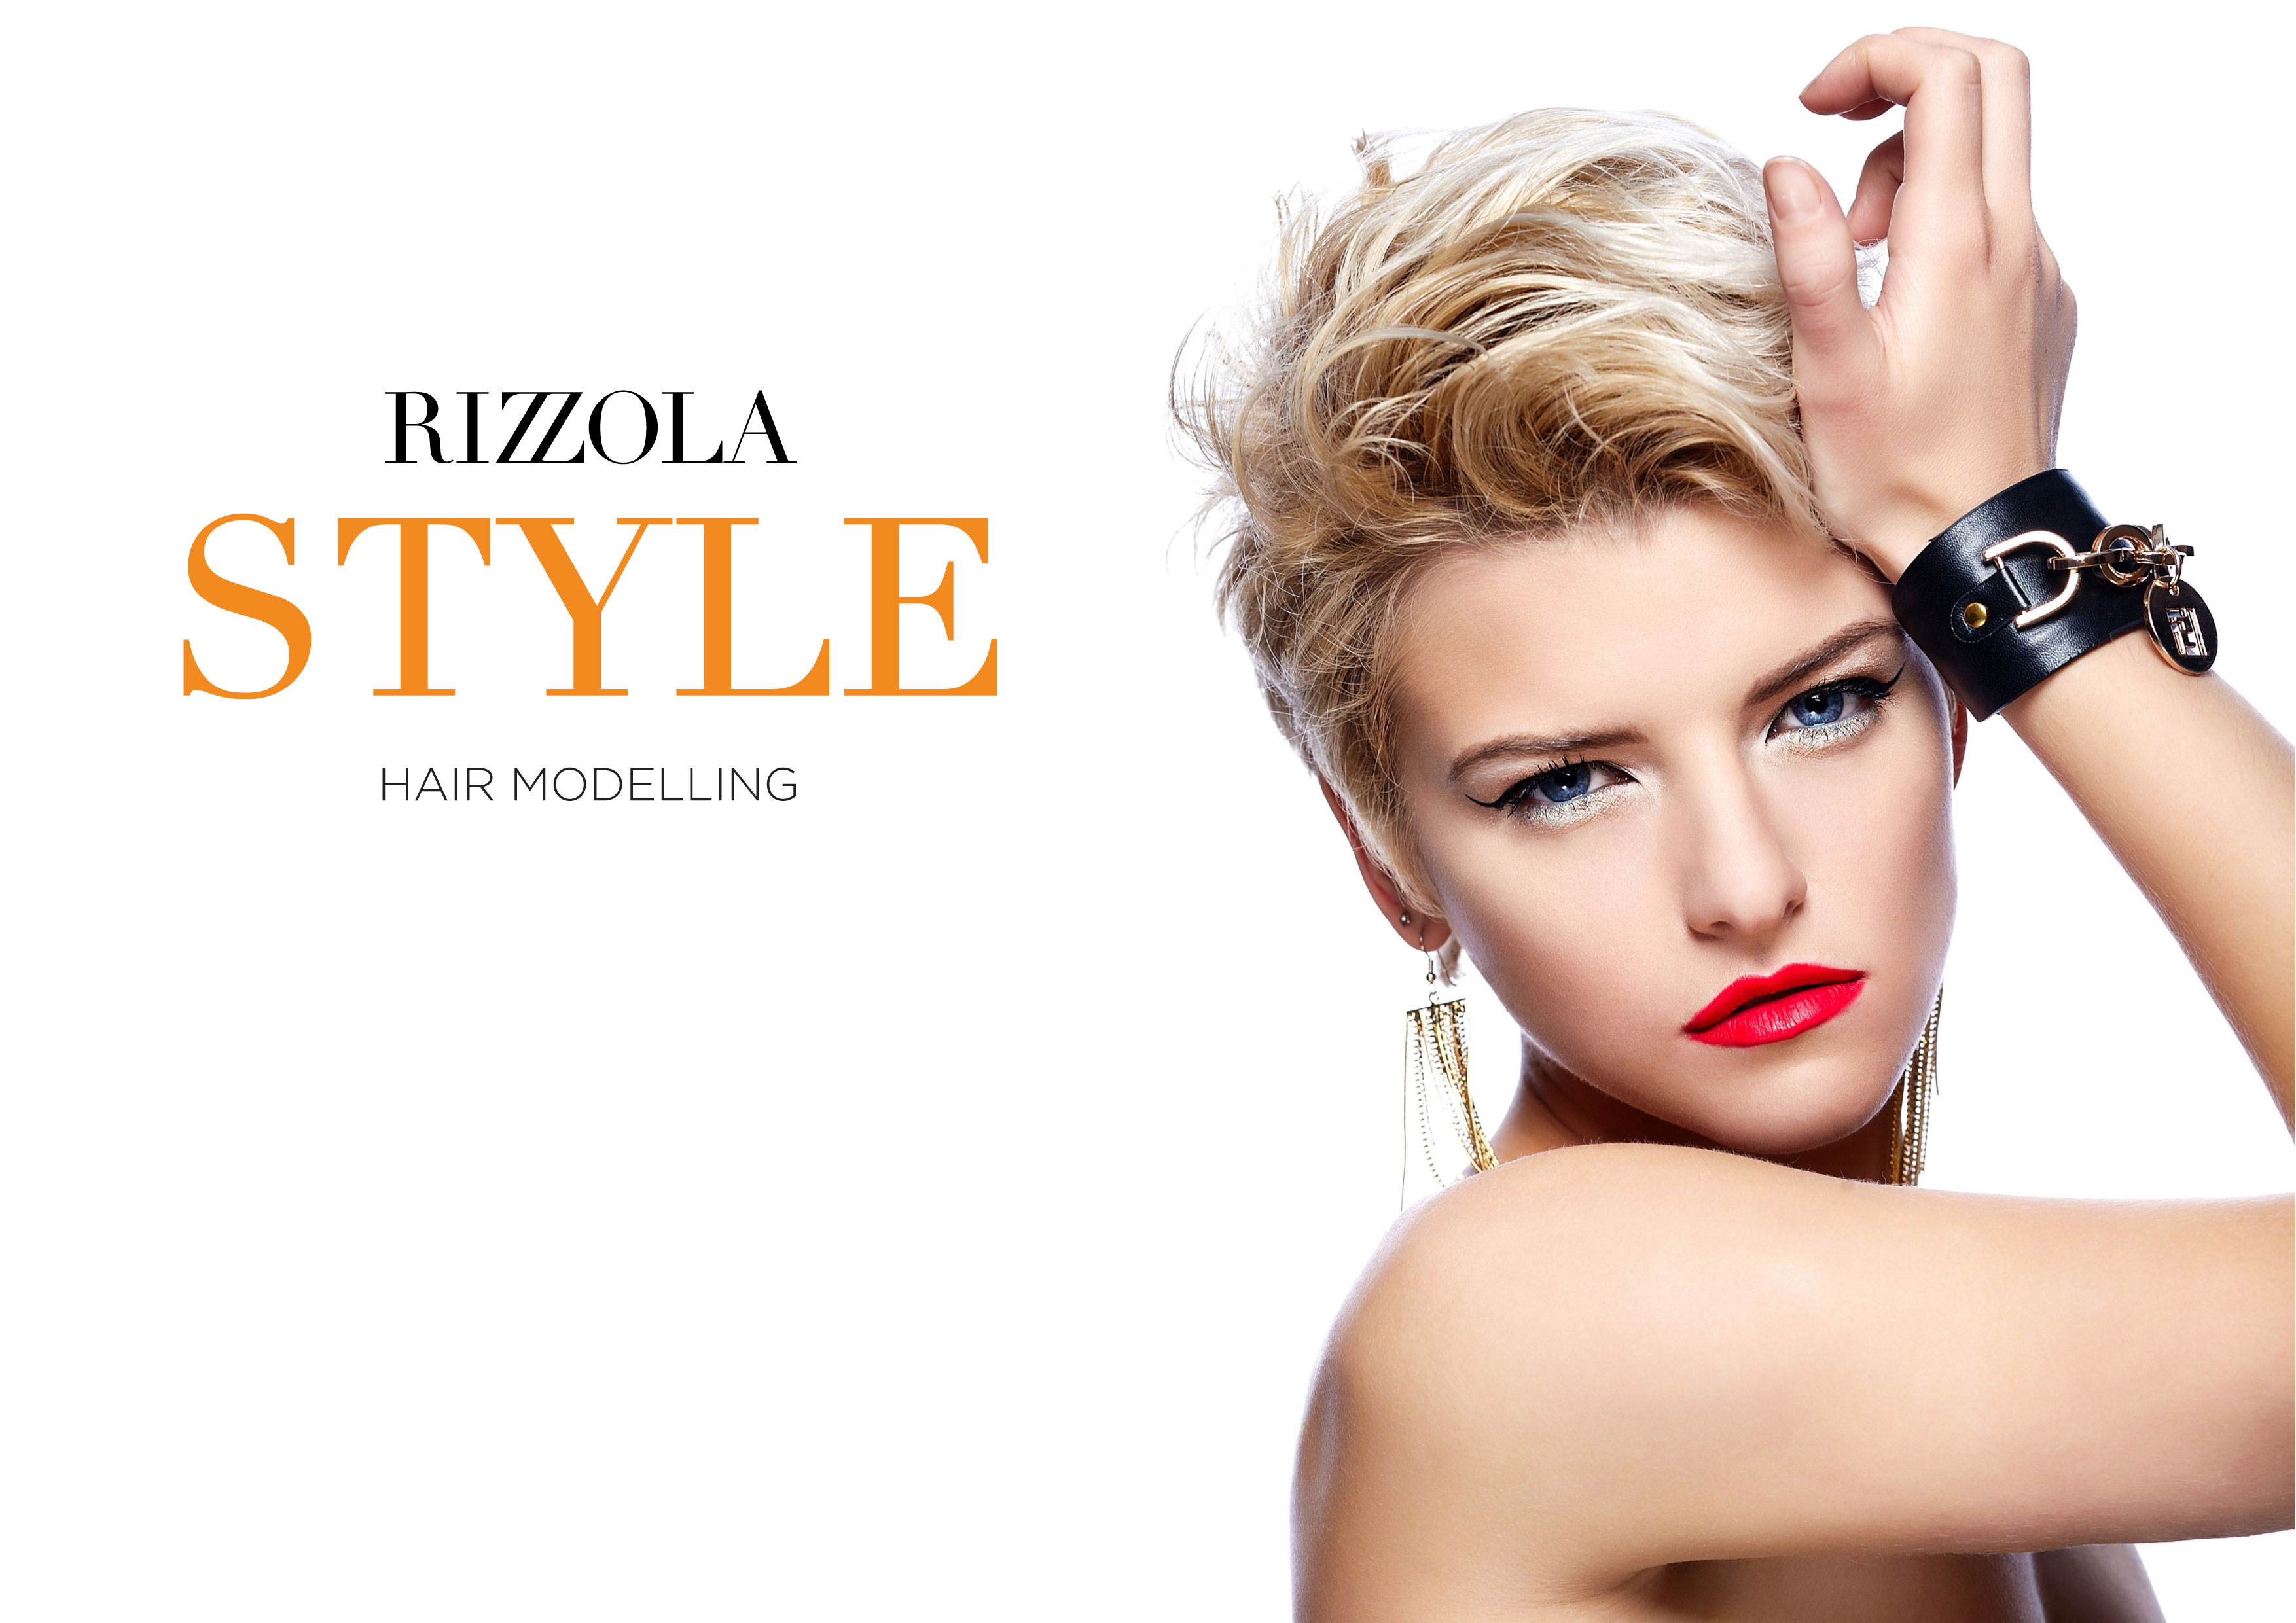 RIZZOLA STYLE HAIR MODELLING